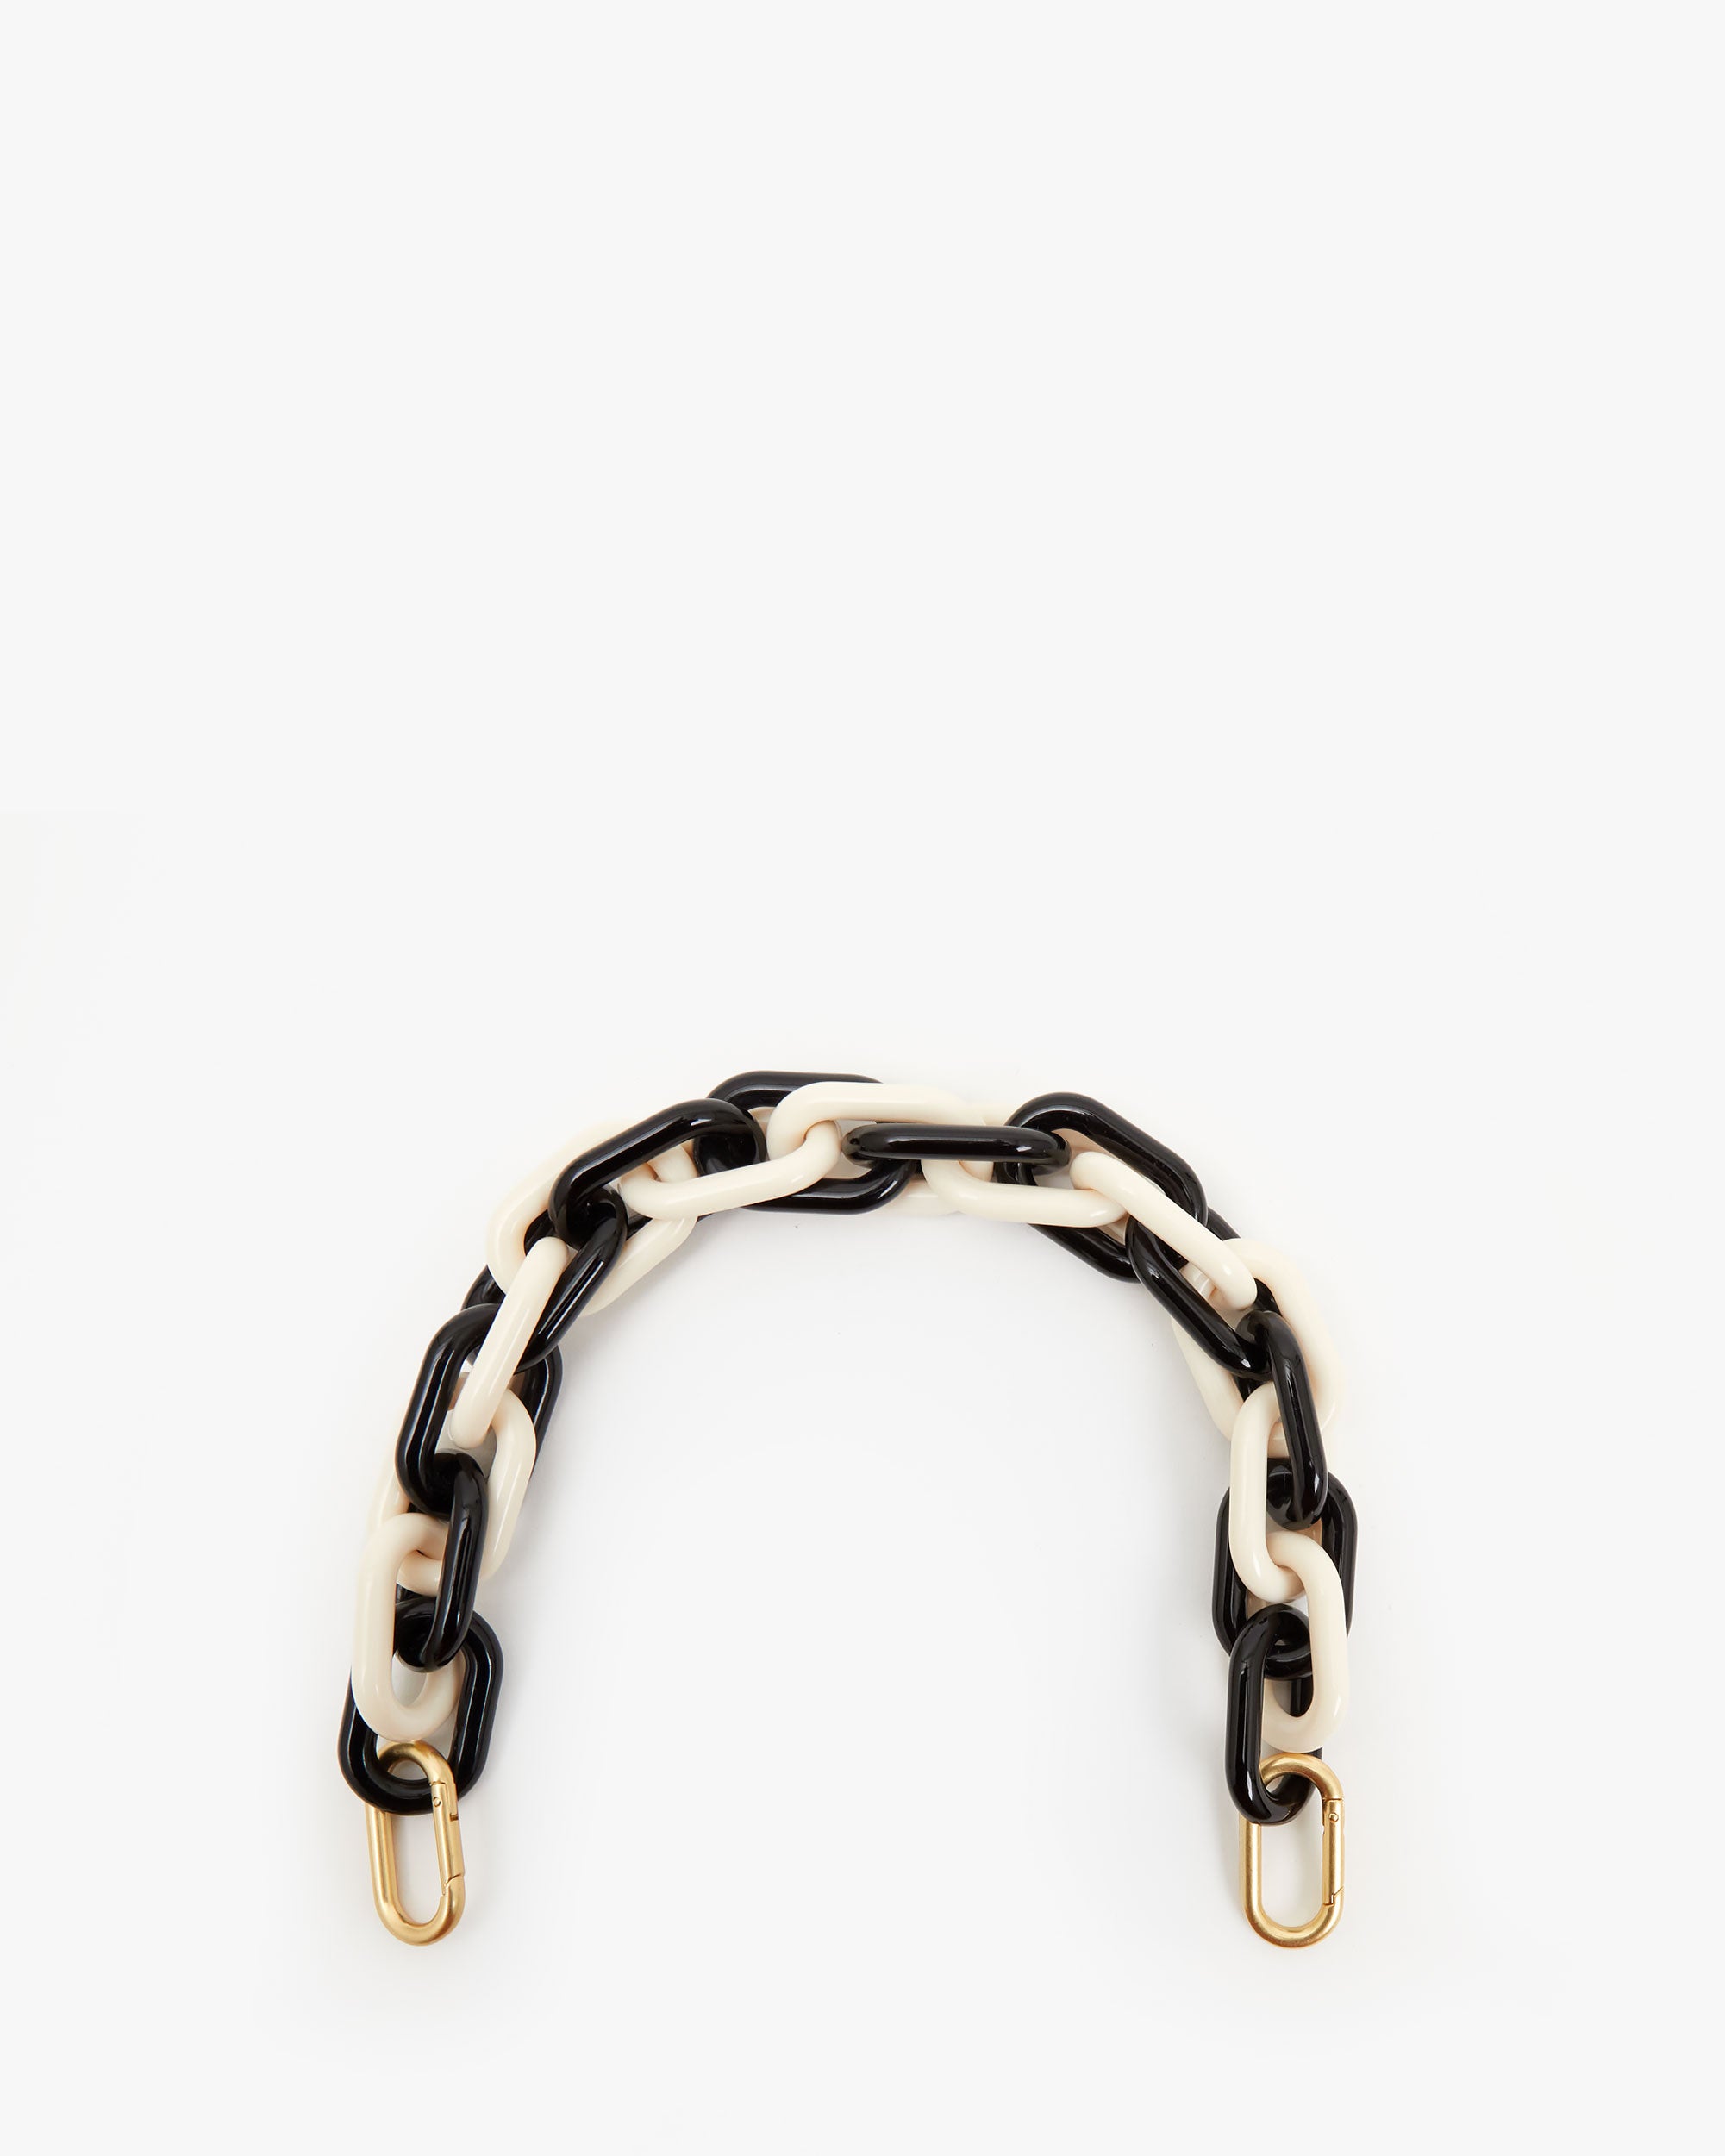 The Clear Acrylic Chain Shortie Bag Strap — House of Happy